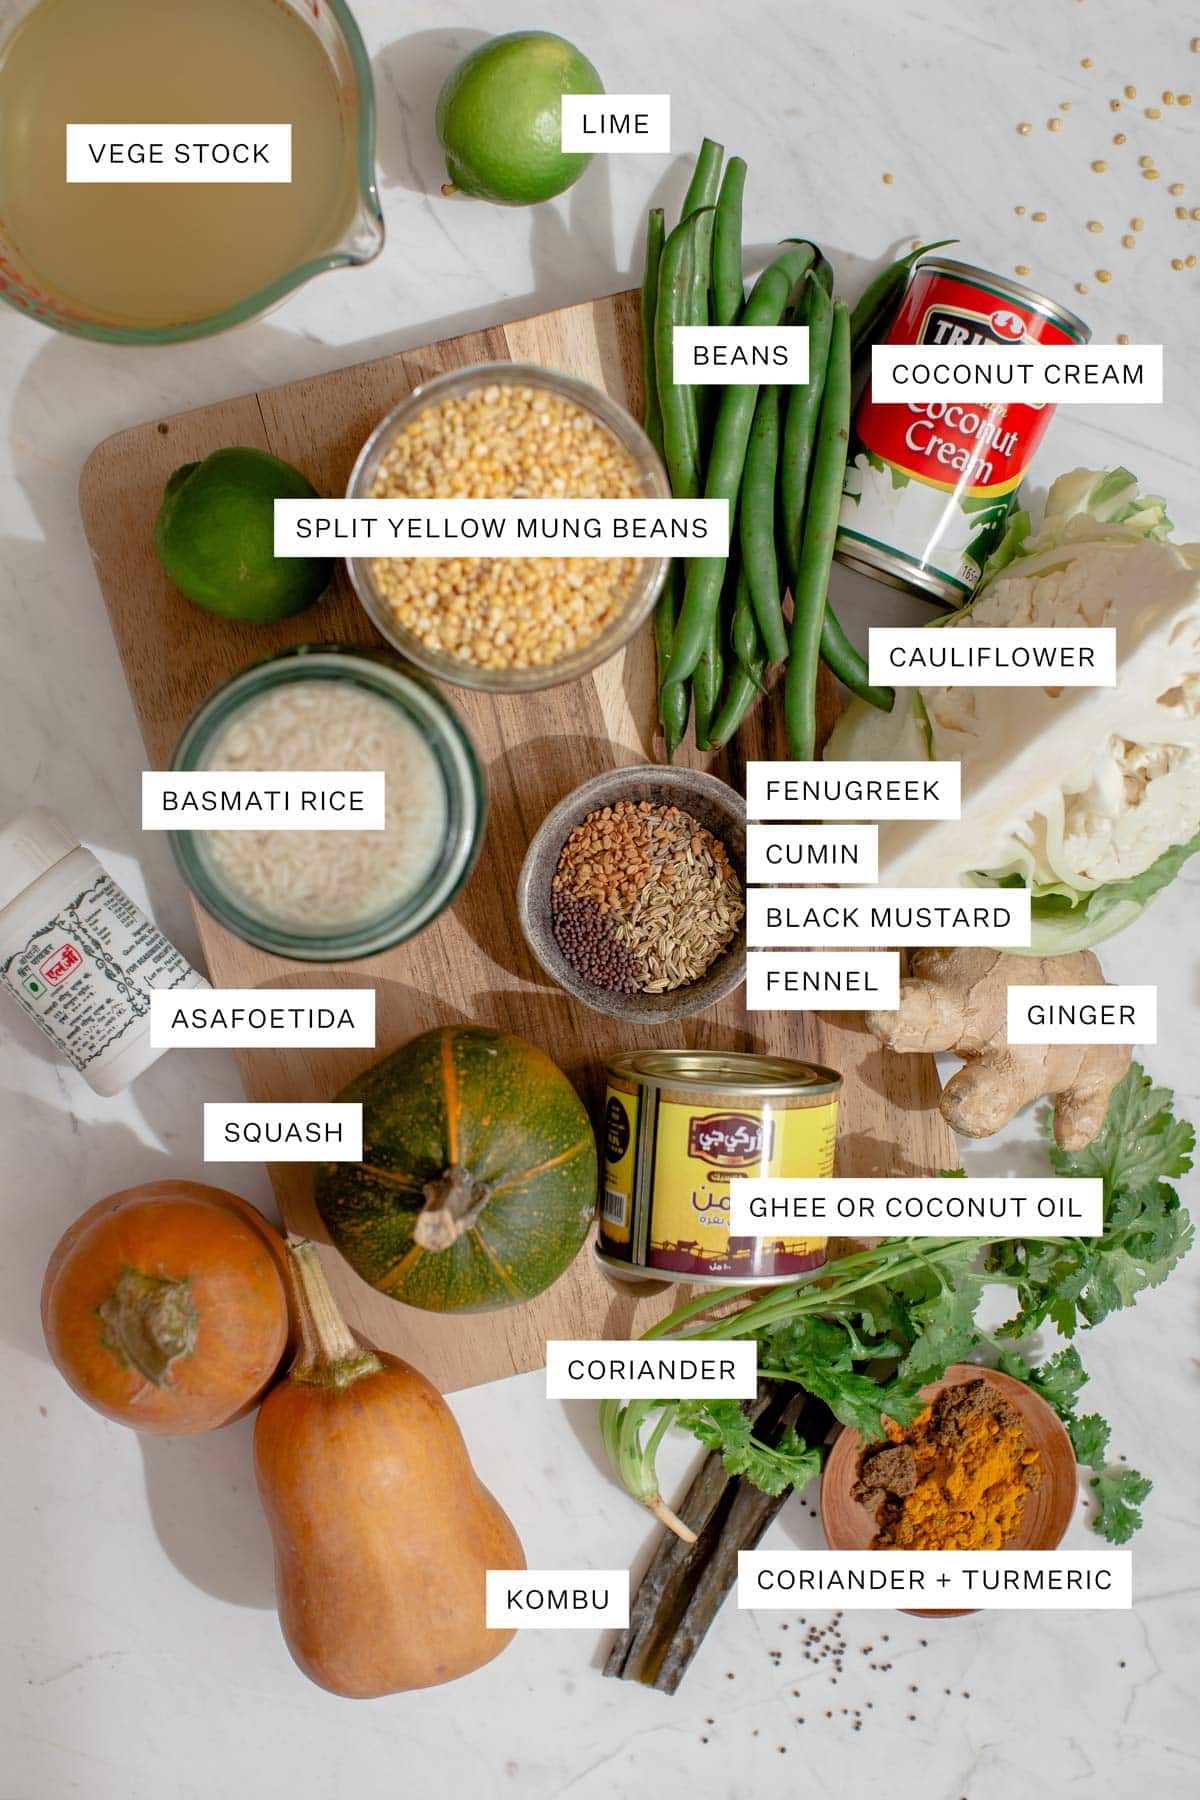 Flat lay of ingredients needed for this dish, including the dal and rice, dried spices, vegetables, ghee, coconut cream, stock, fresh herbs and lime.